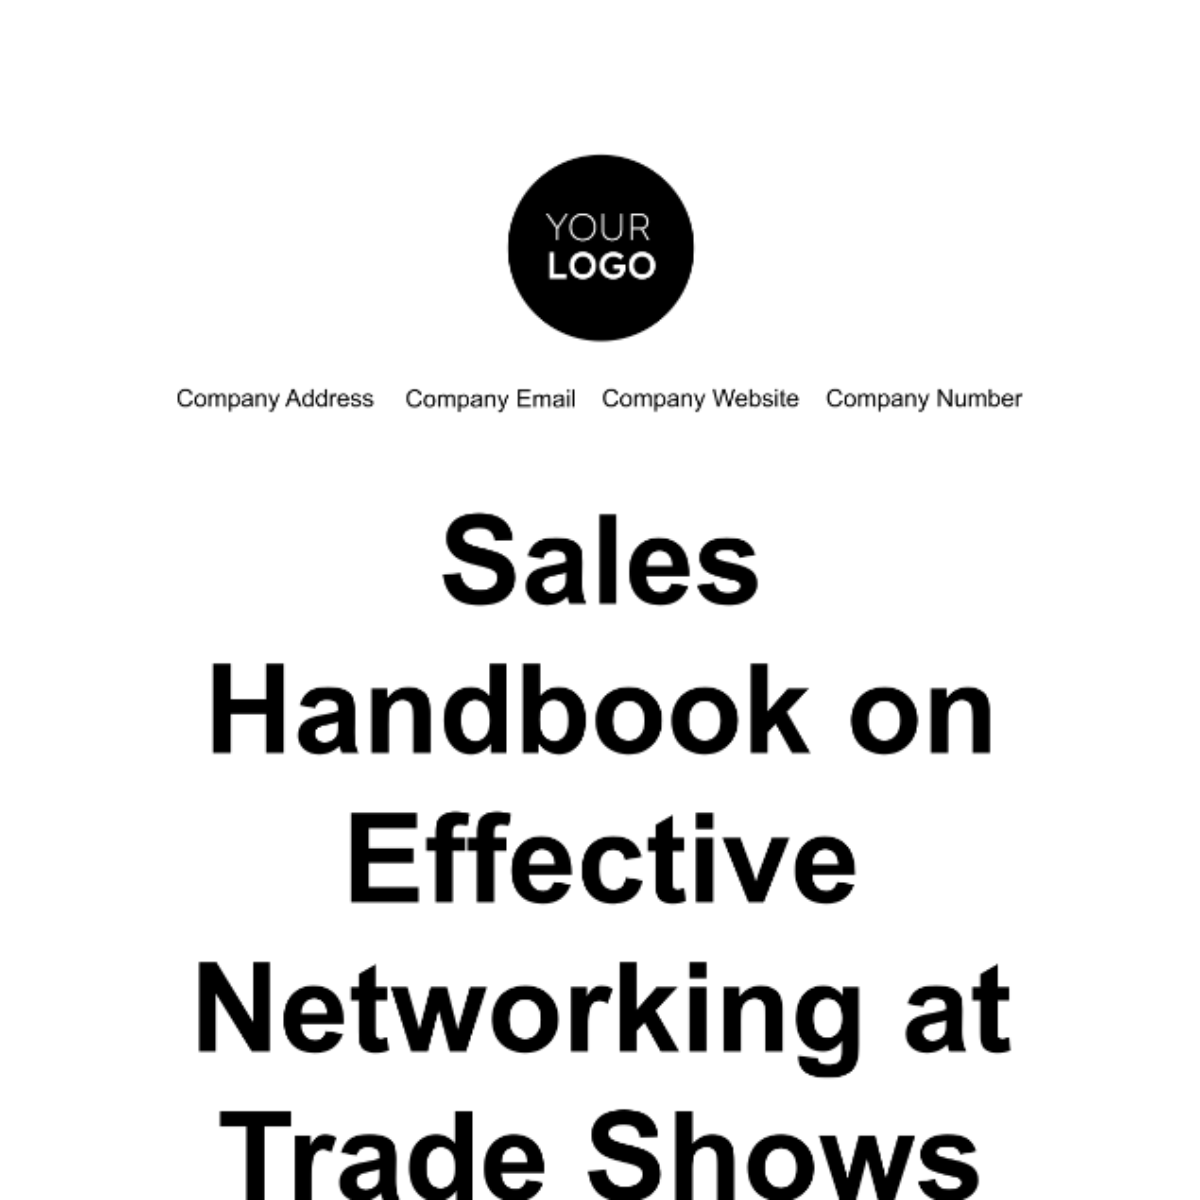 Free Sales Handbook on Effective Networking at Trade Shows Template